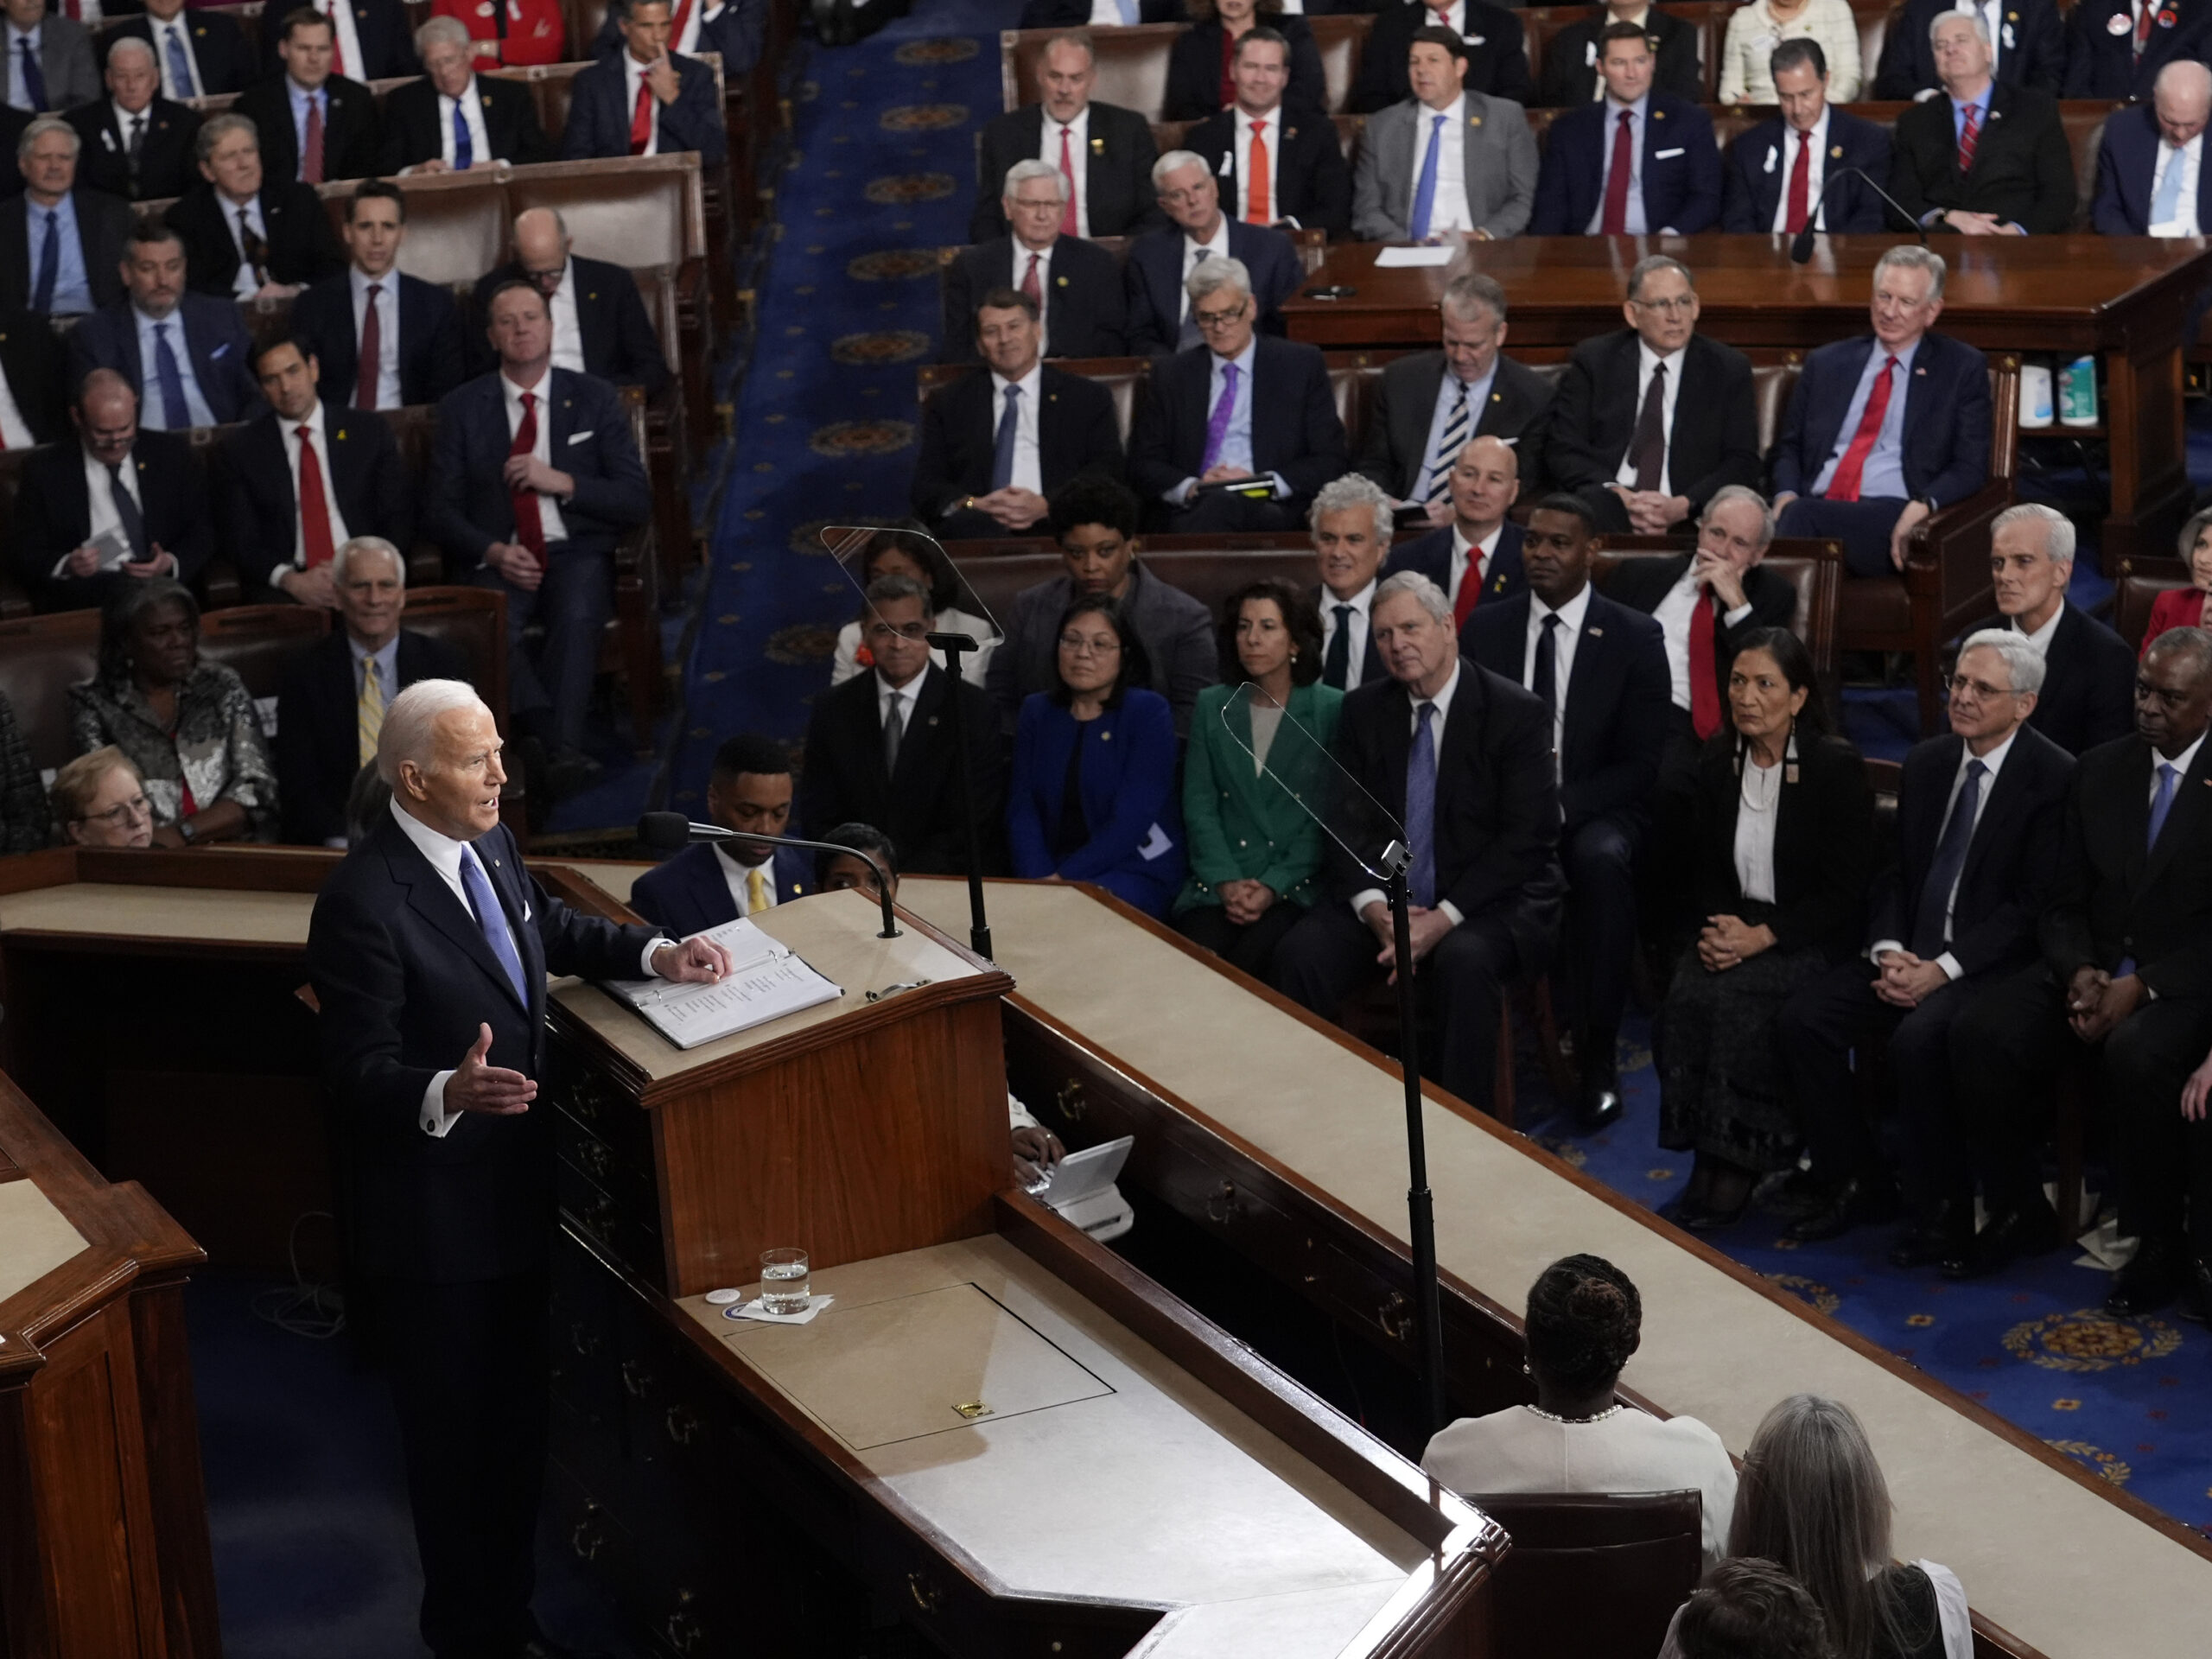 5 takeaways from President Biden’s State of the Union address